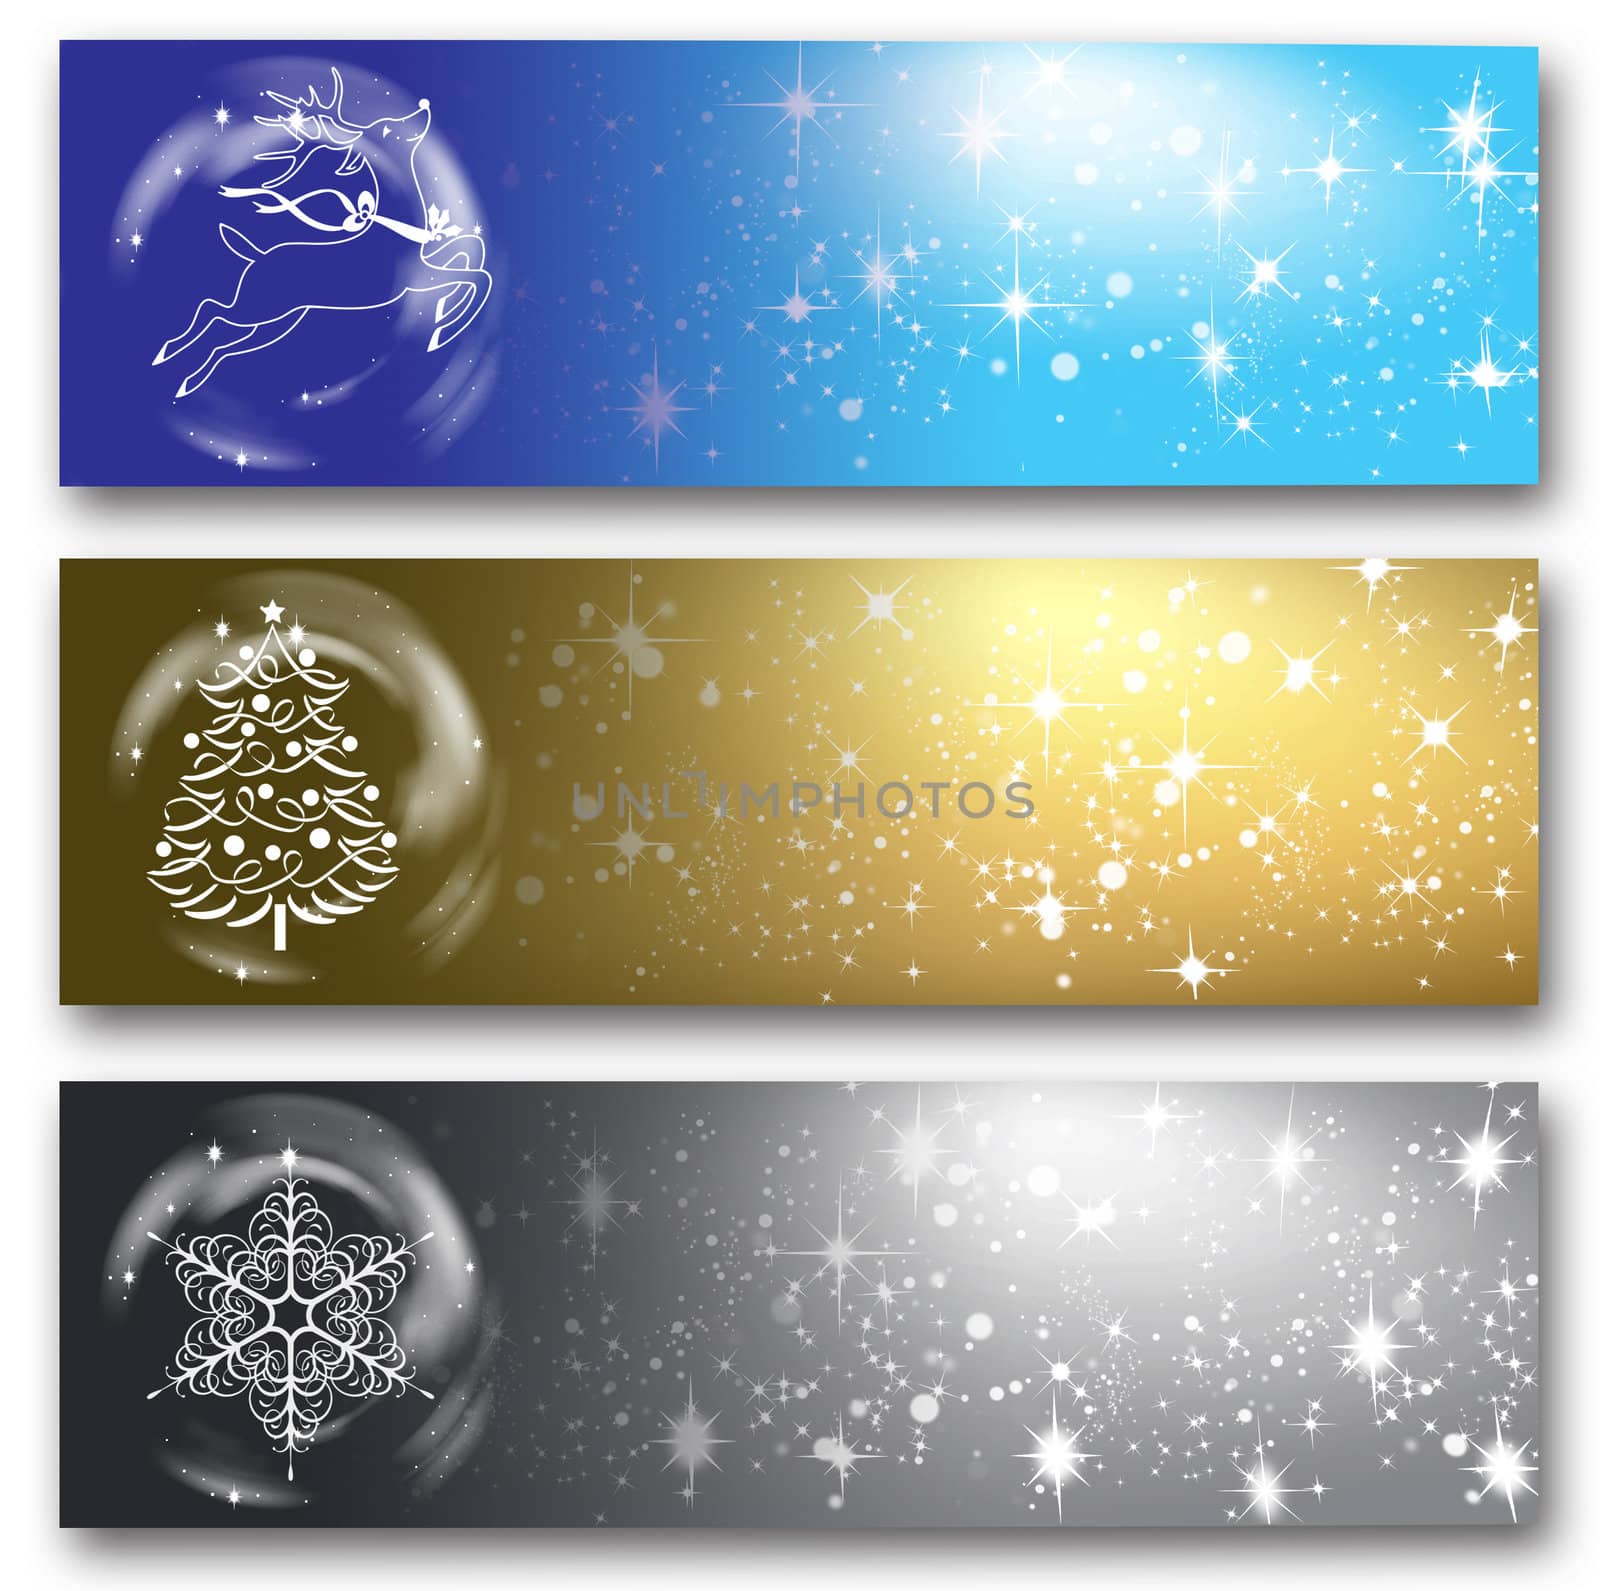 New year card, decorative eps format